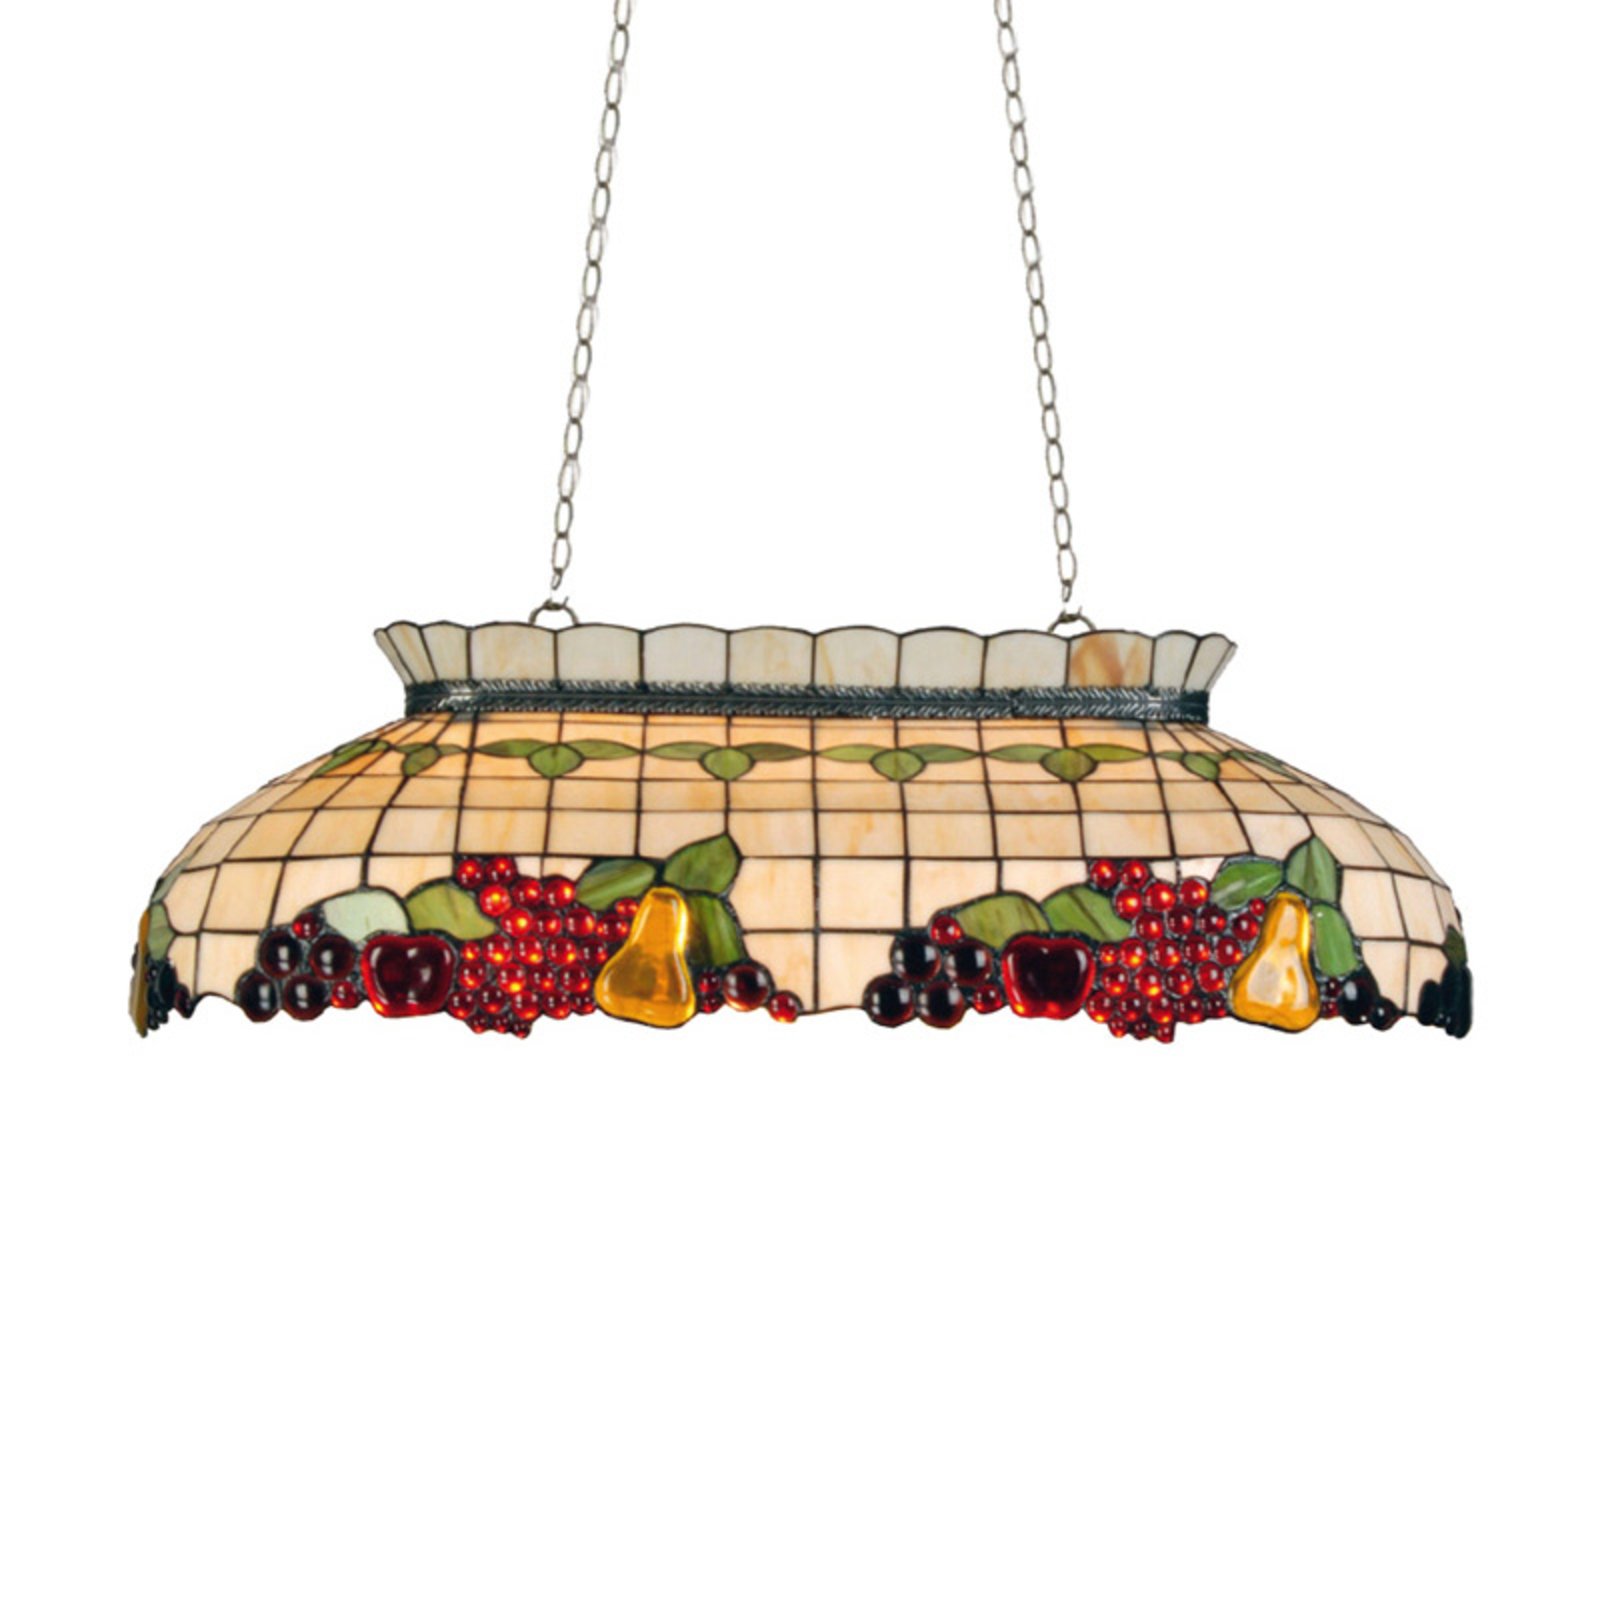 Pendant light Sabet in the Tiffany style